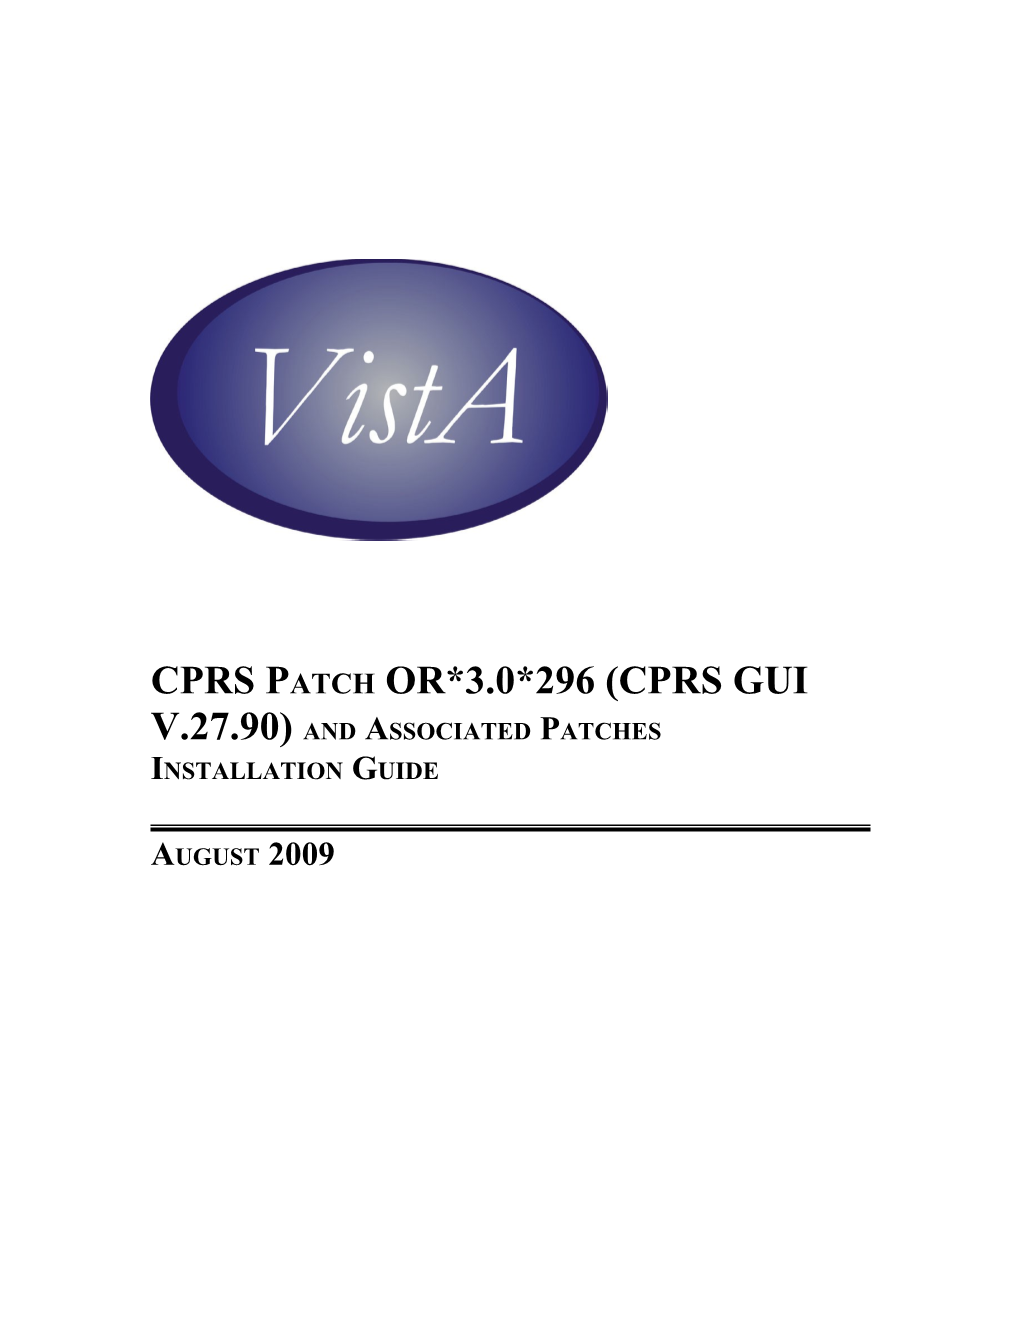 CPRS Patch OR*3.0*296 (CPRS GUI V.27.90) and Associated Patches